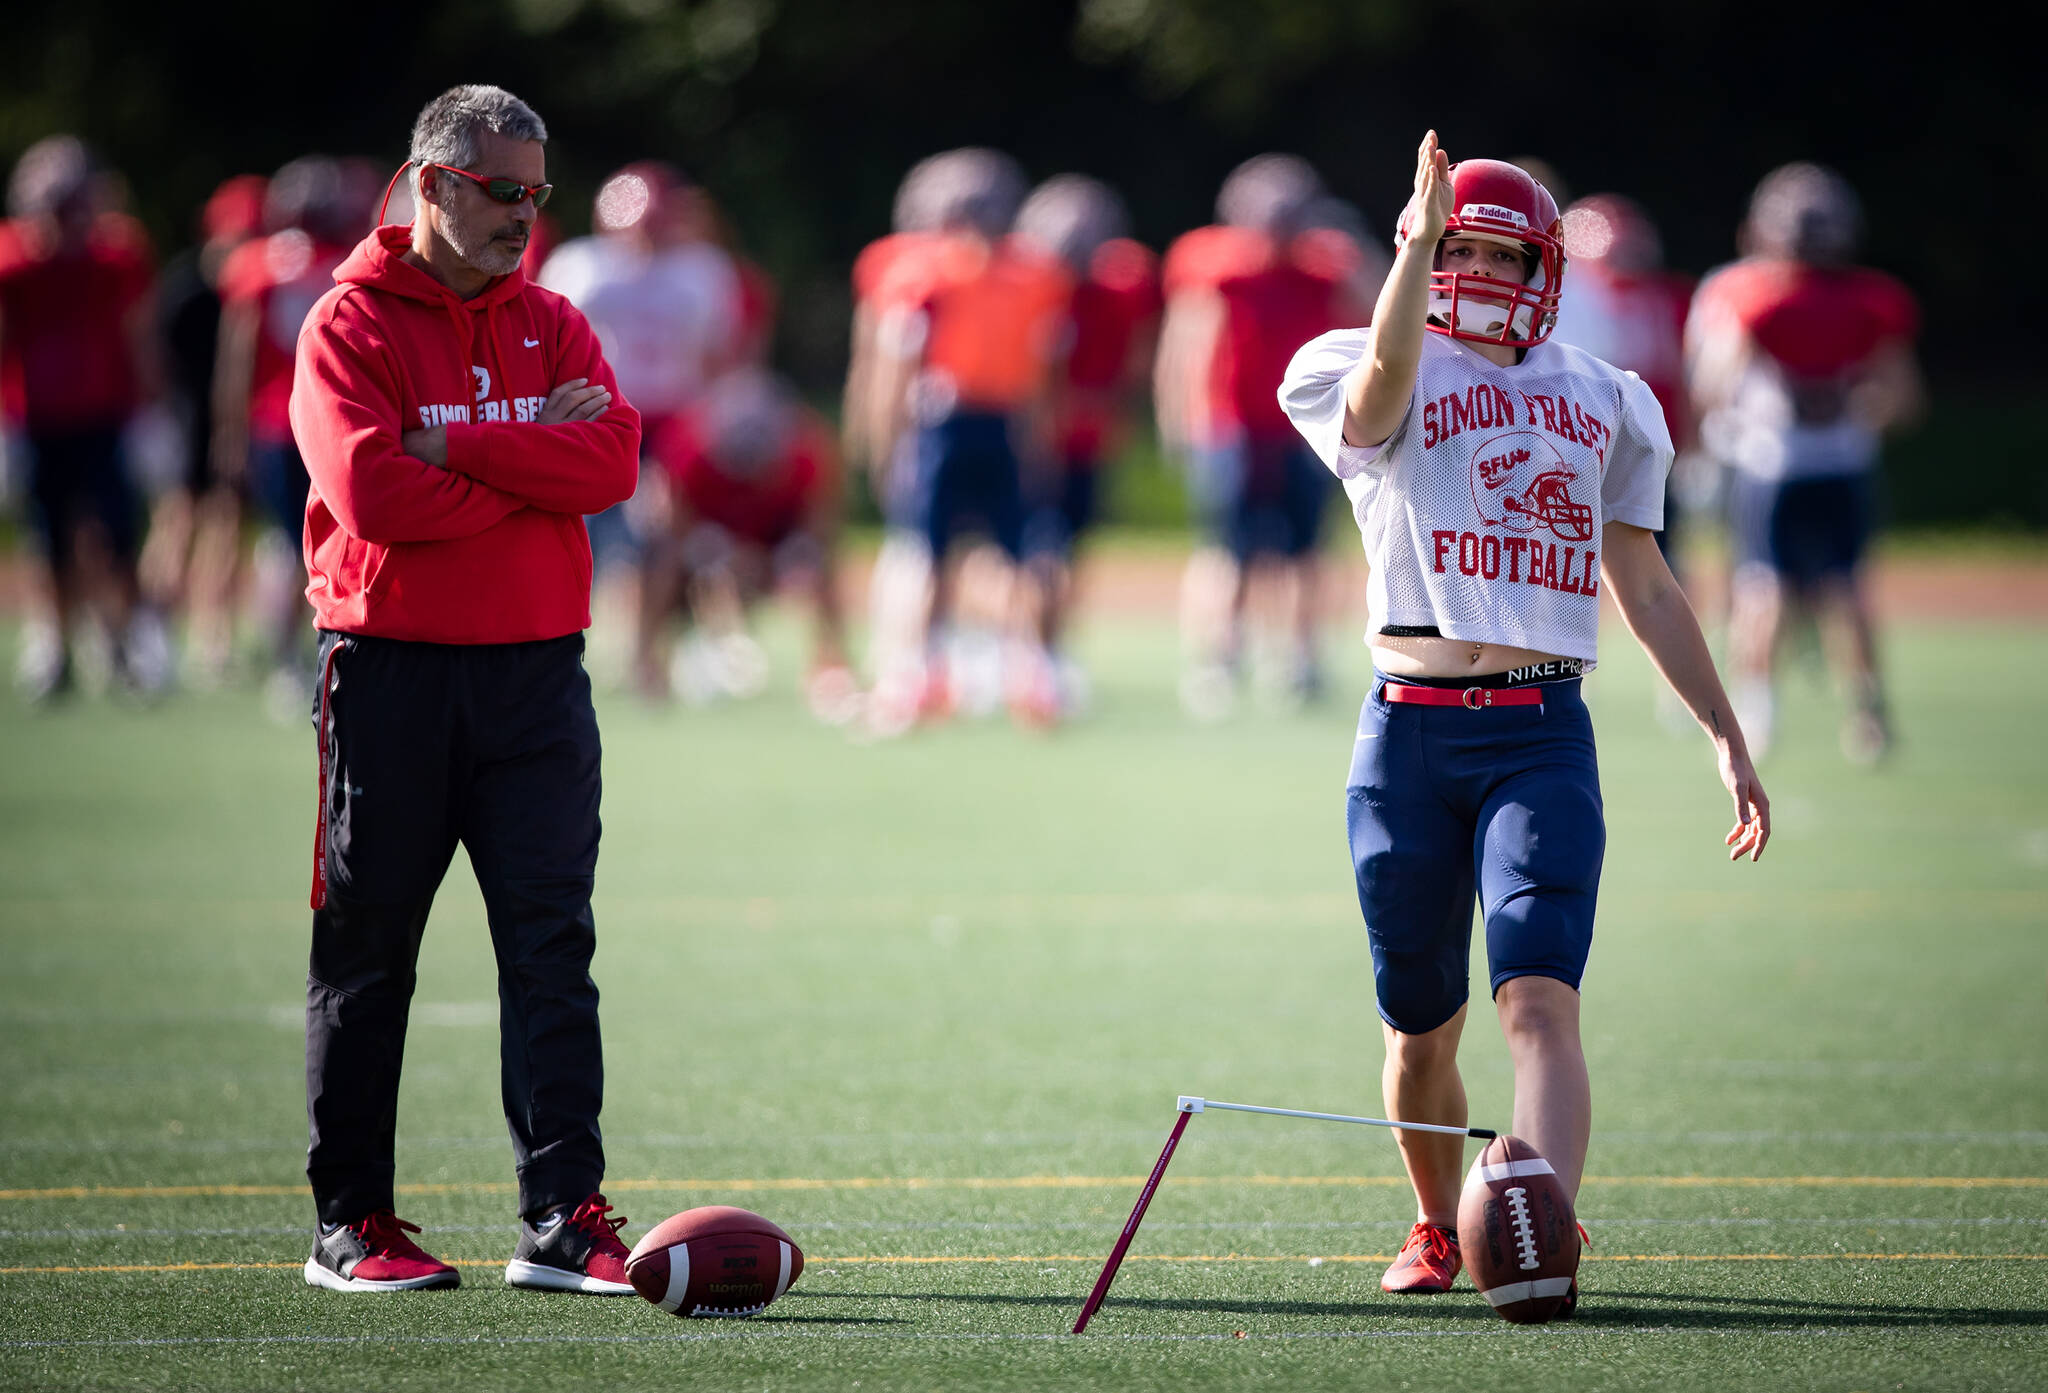 Simon Fraser University football team kicker Kristie Elliott, who had recently become the first Canadian woman to play and score in a college football game, lines up a kick as coach Jerome Erdman watches during team practice in Burnaby, B.C., Tuesday, Sept. 21, 2021. THE CANADIAN PRESS/Darryl Dyck